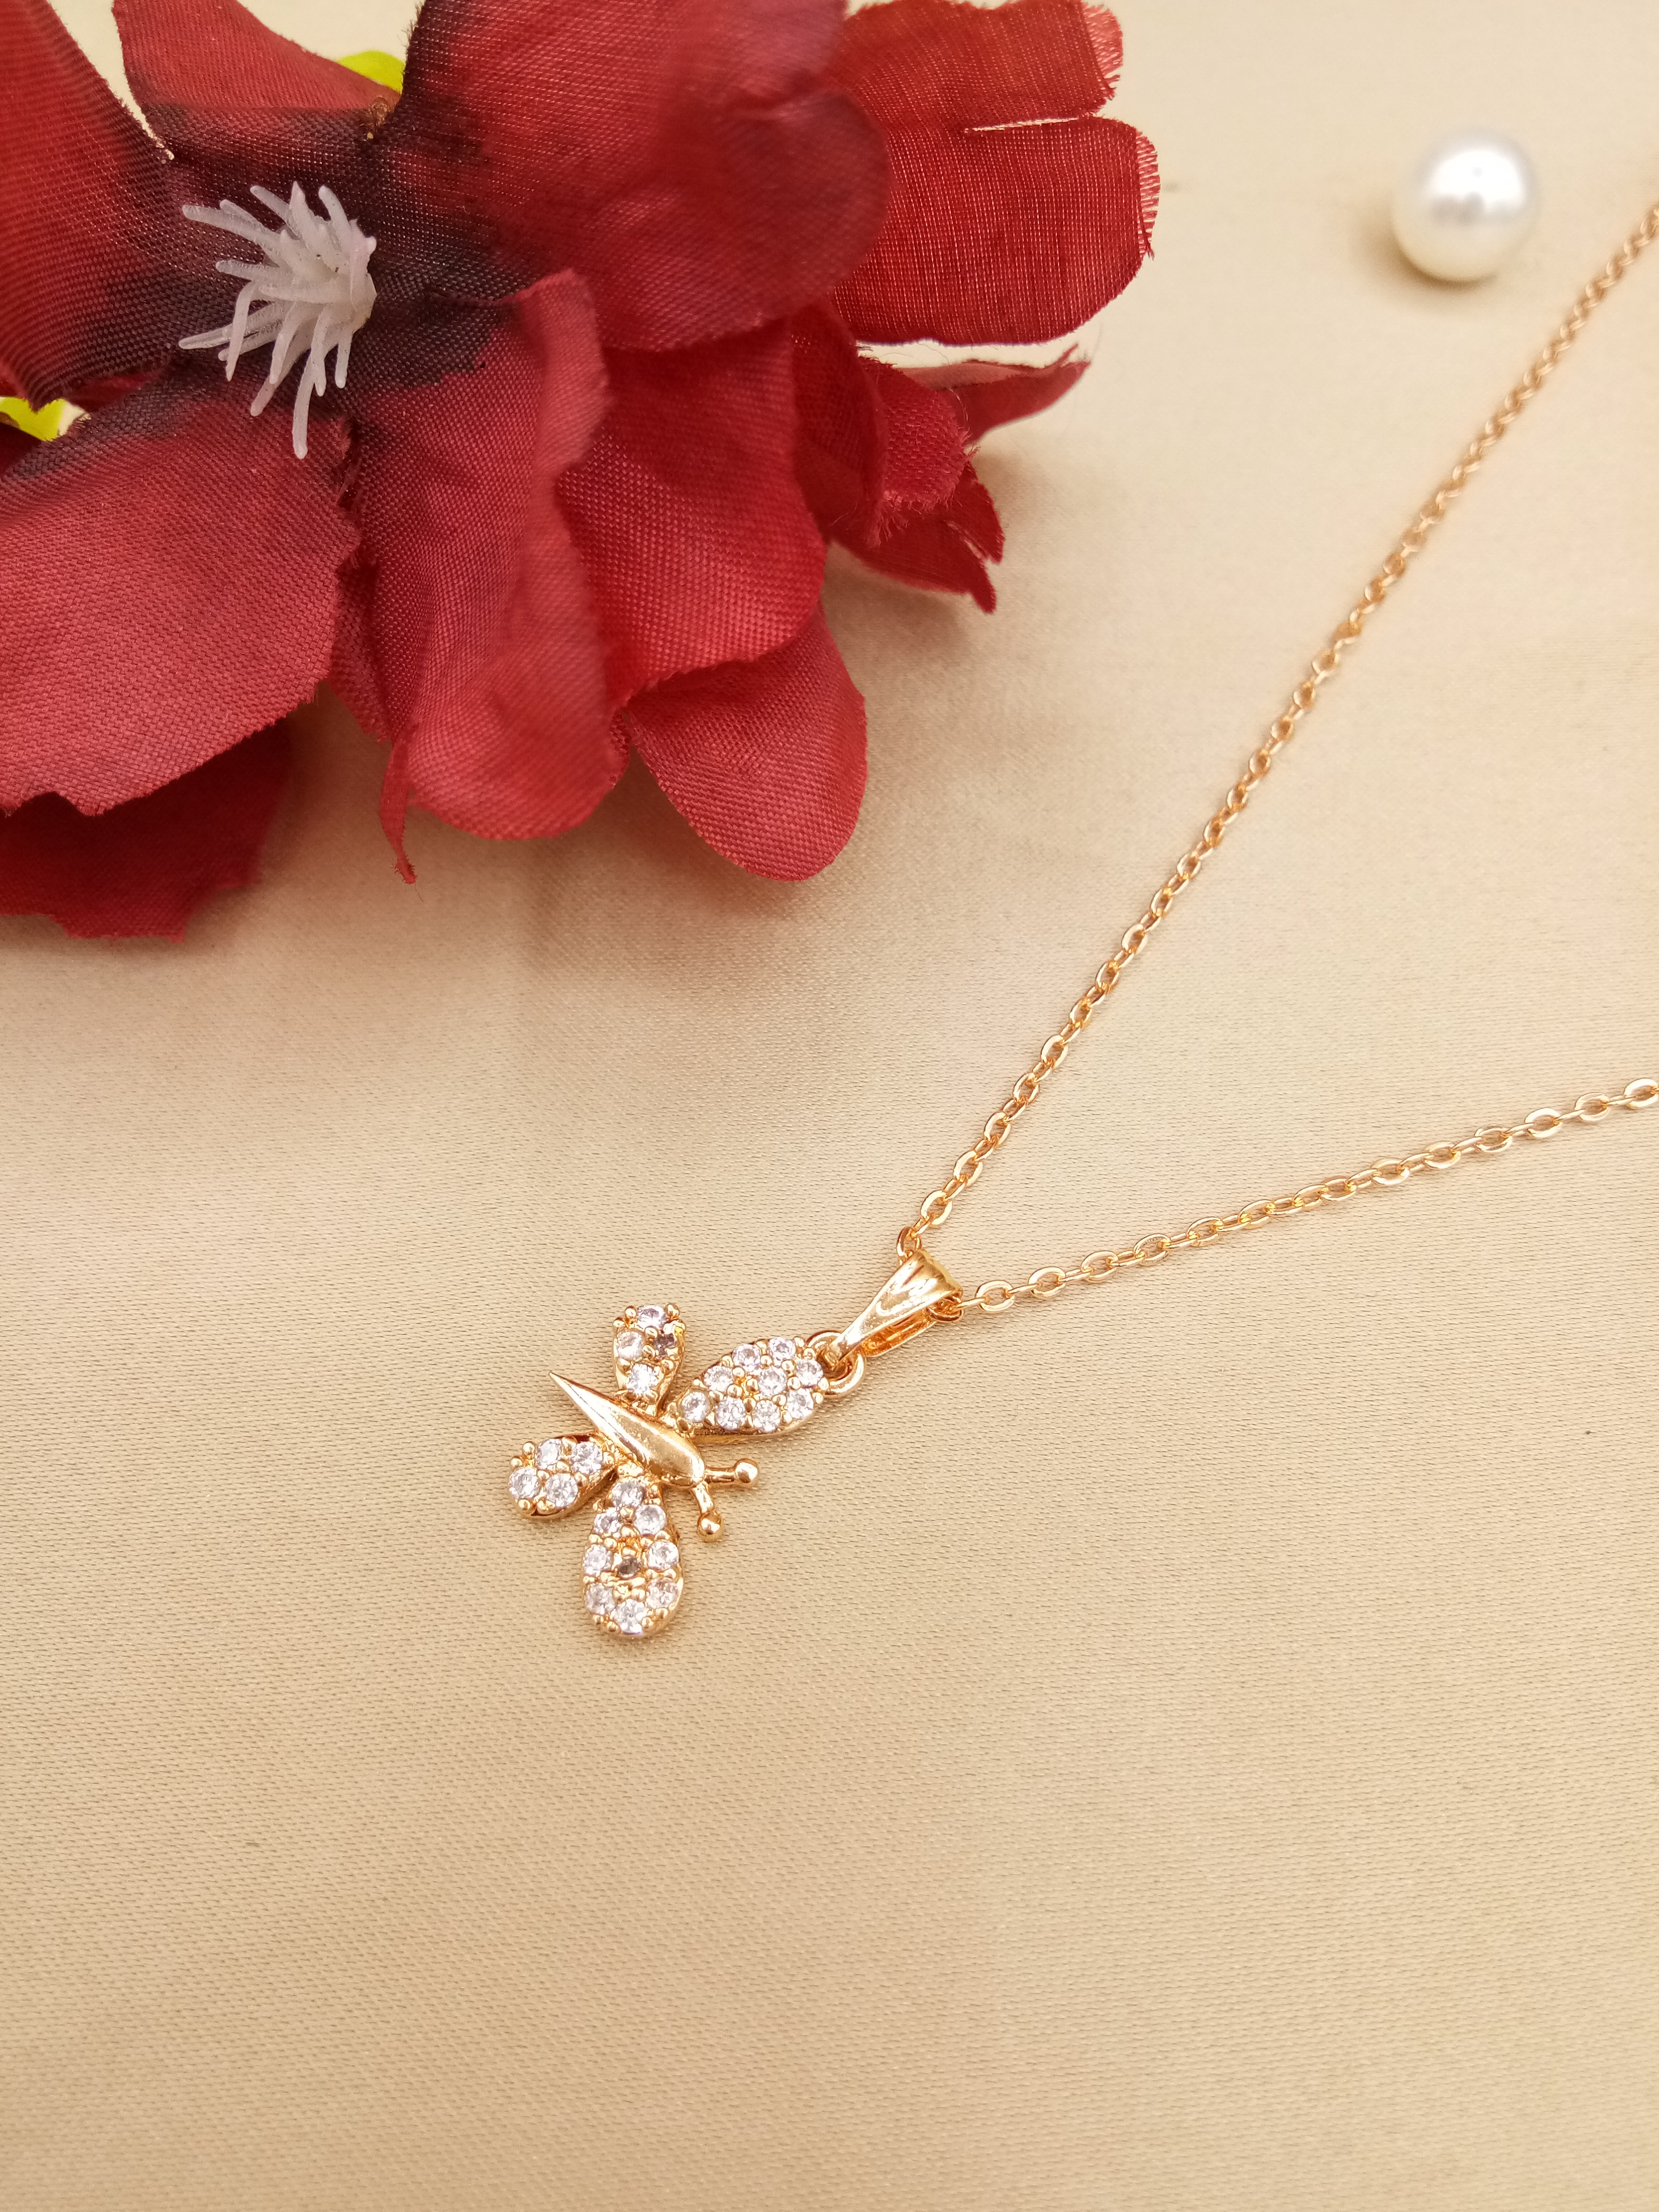 AD ROSE PENDENT - 07187 NX